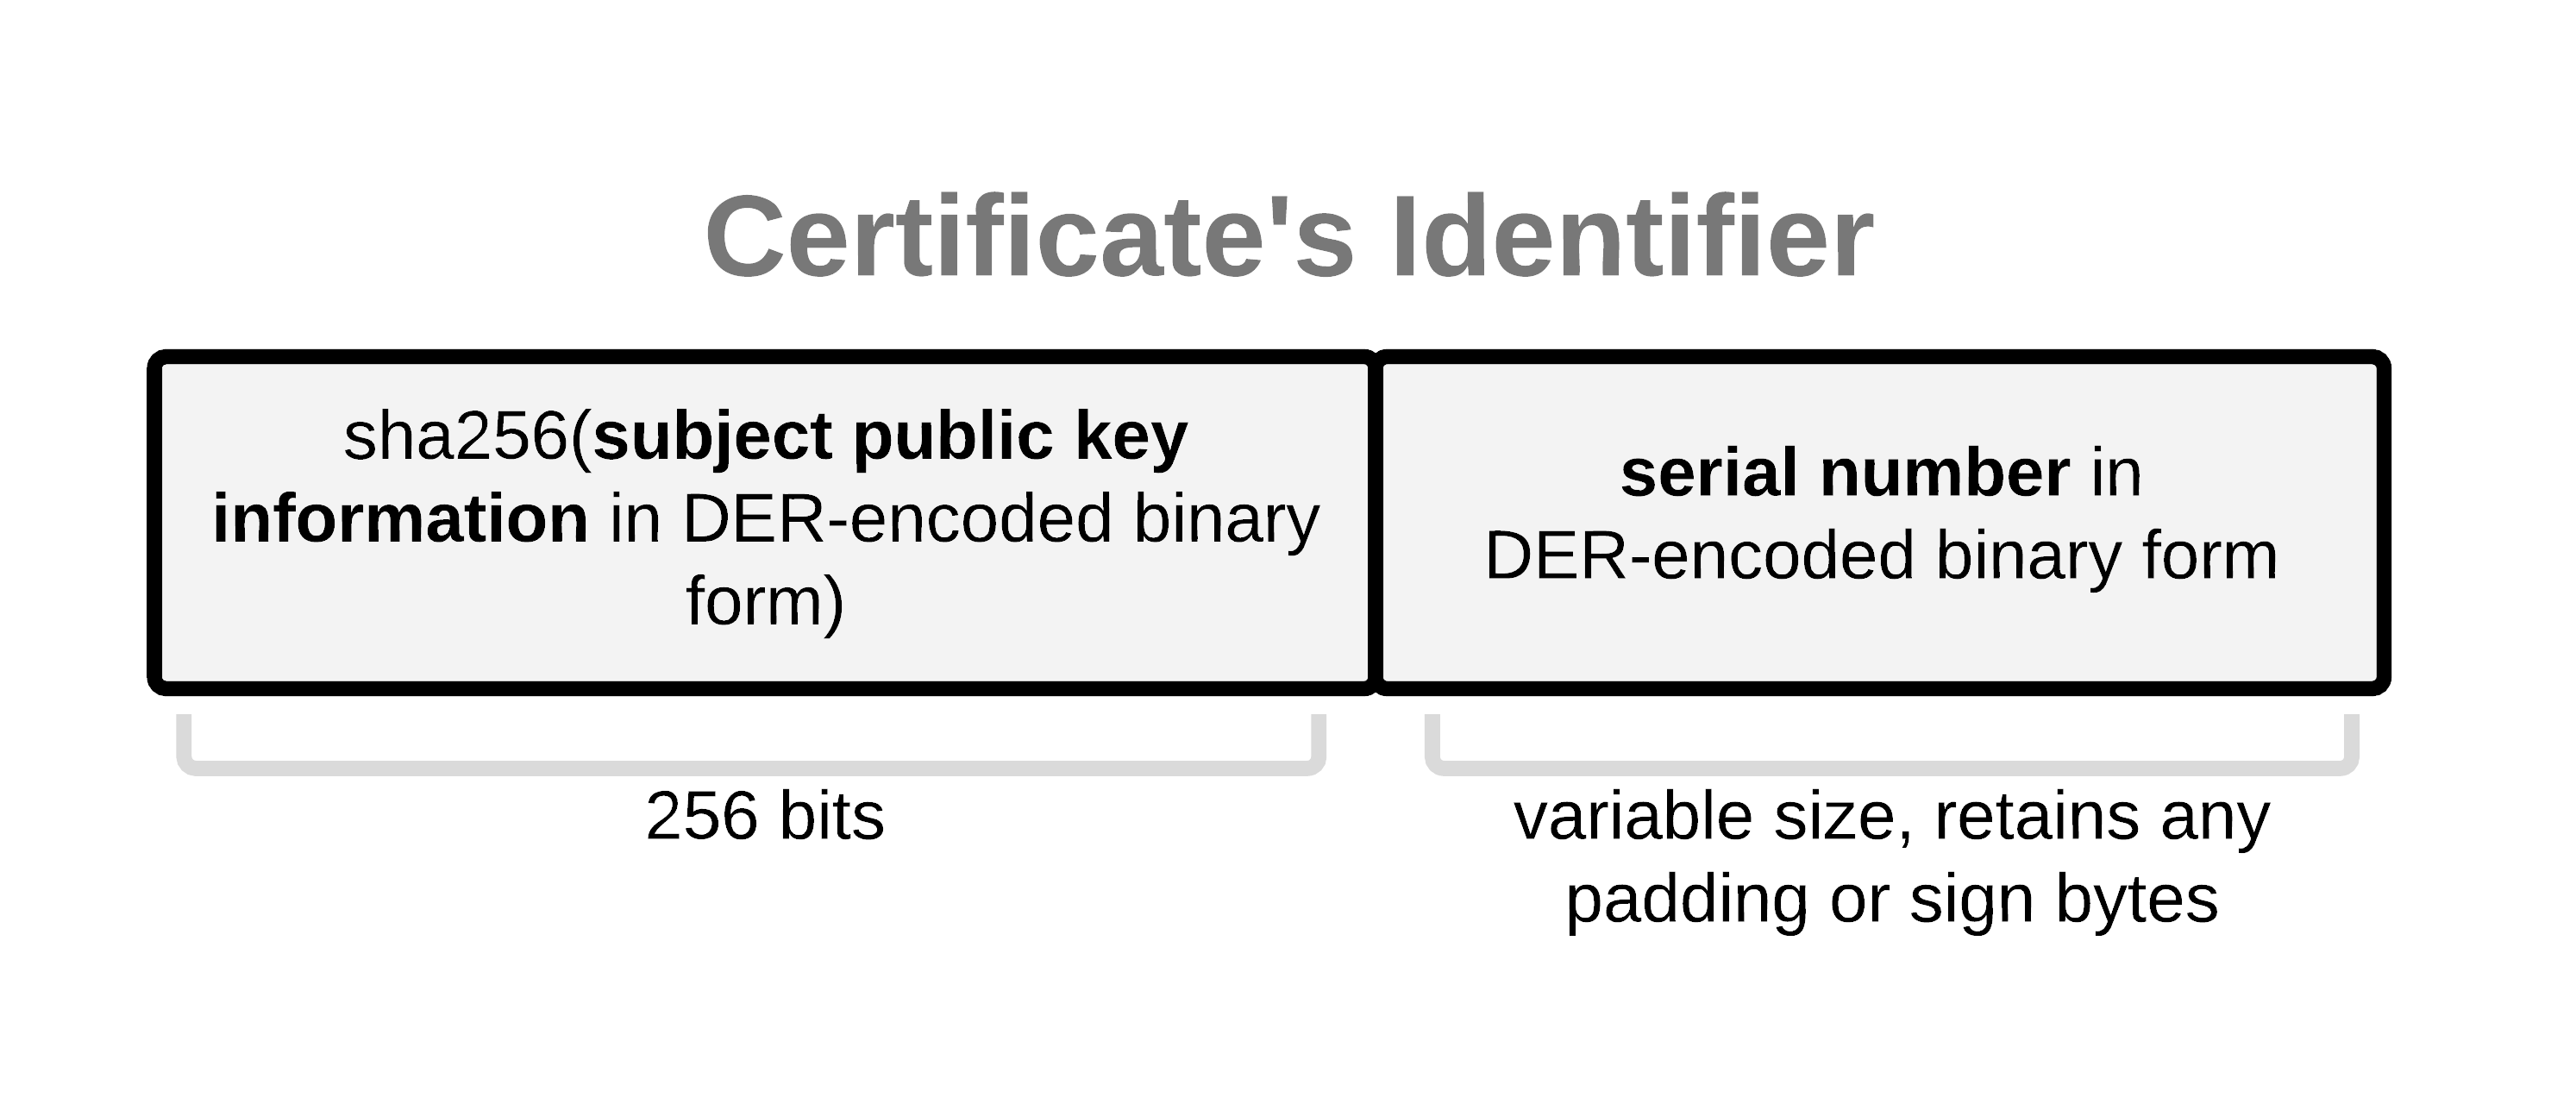 The data structure used for certificate identification